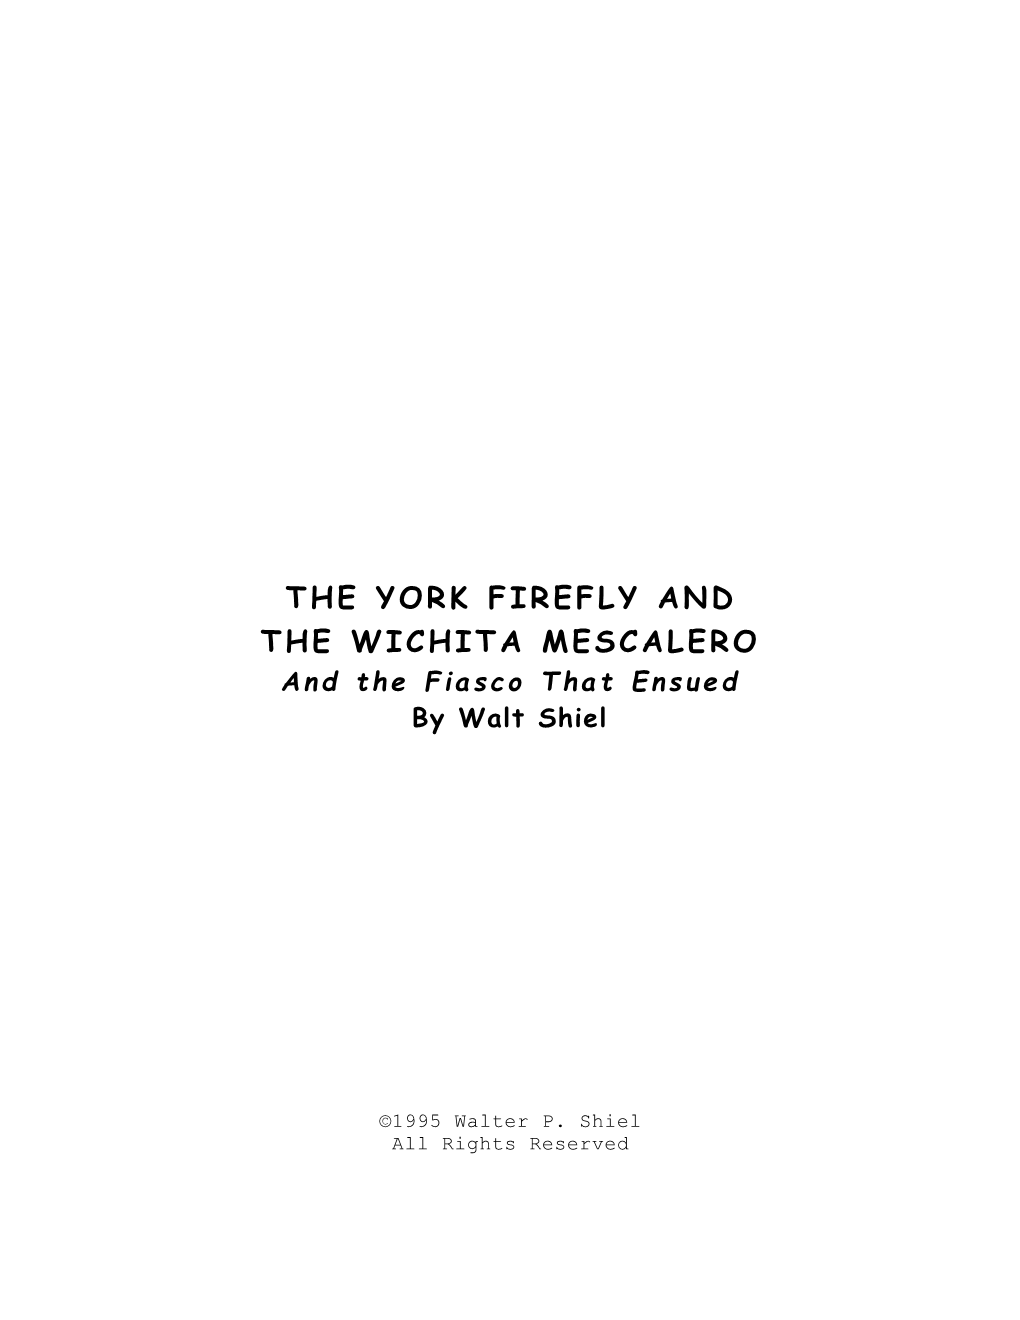 THE YORK FIREFLY and the WICHITA MESCALERO and the Fiasco That Ensued by Walt Shiel